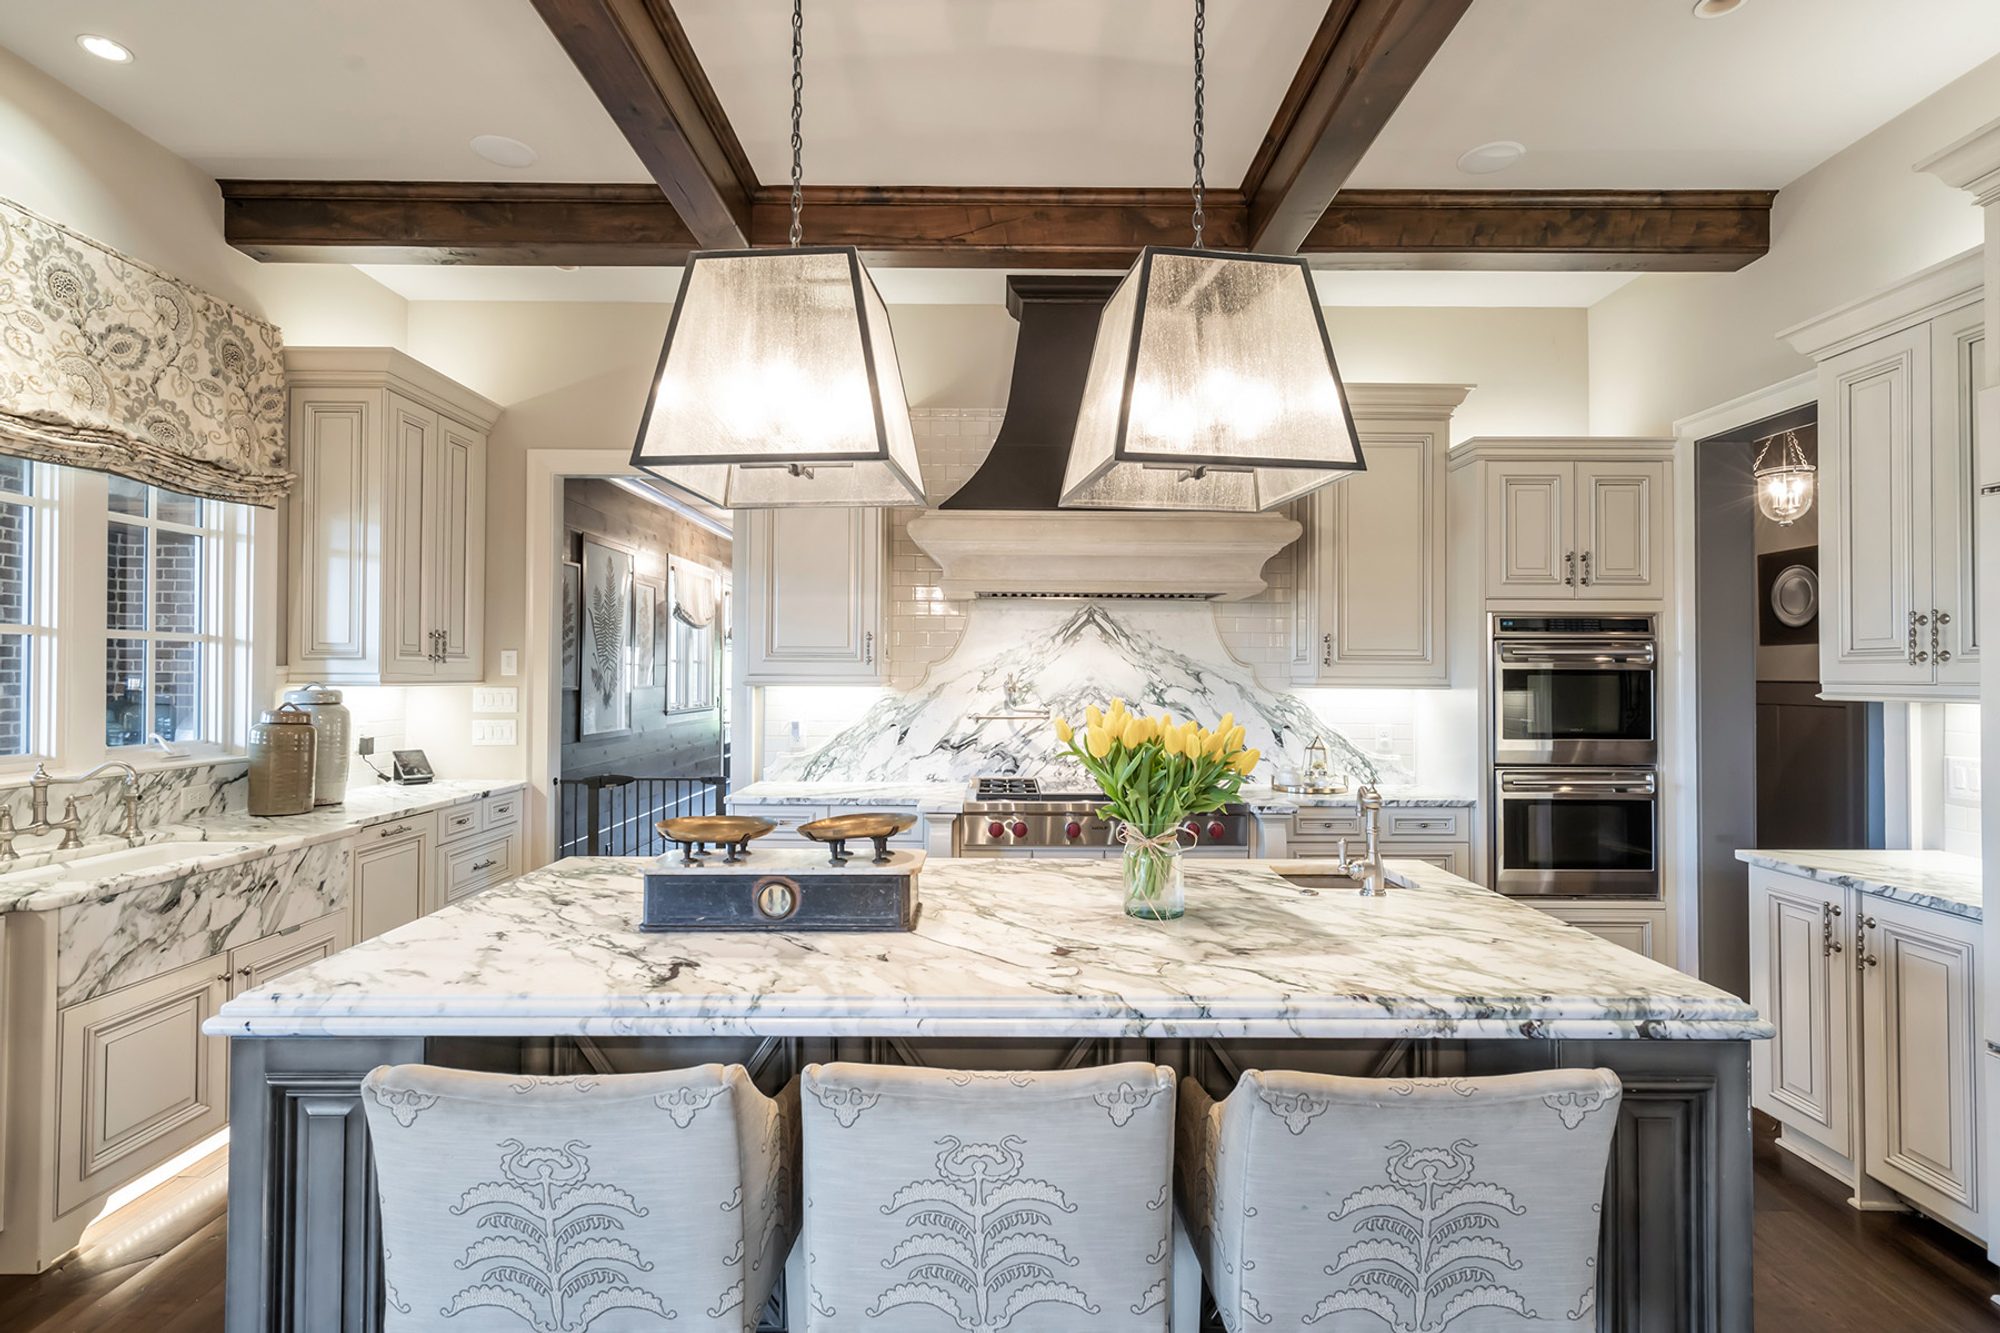 Custom high end kitchen with marble countertops and solid slab backsplash, Dark wood coffered ceiling.